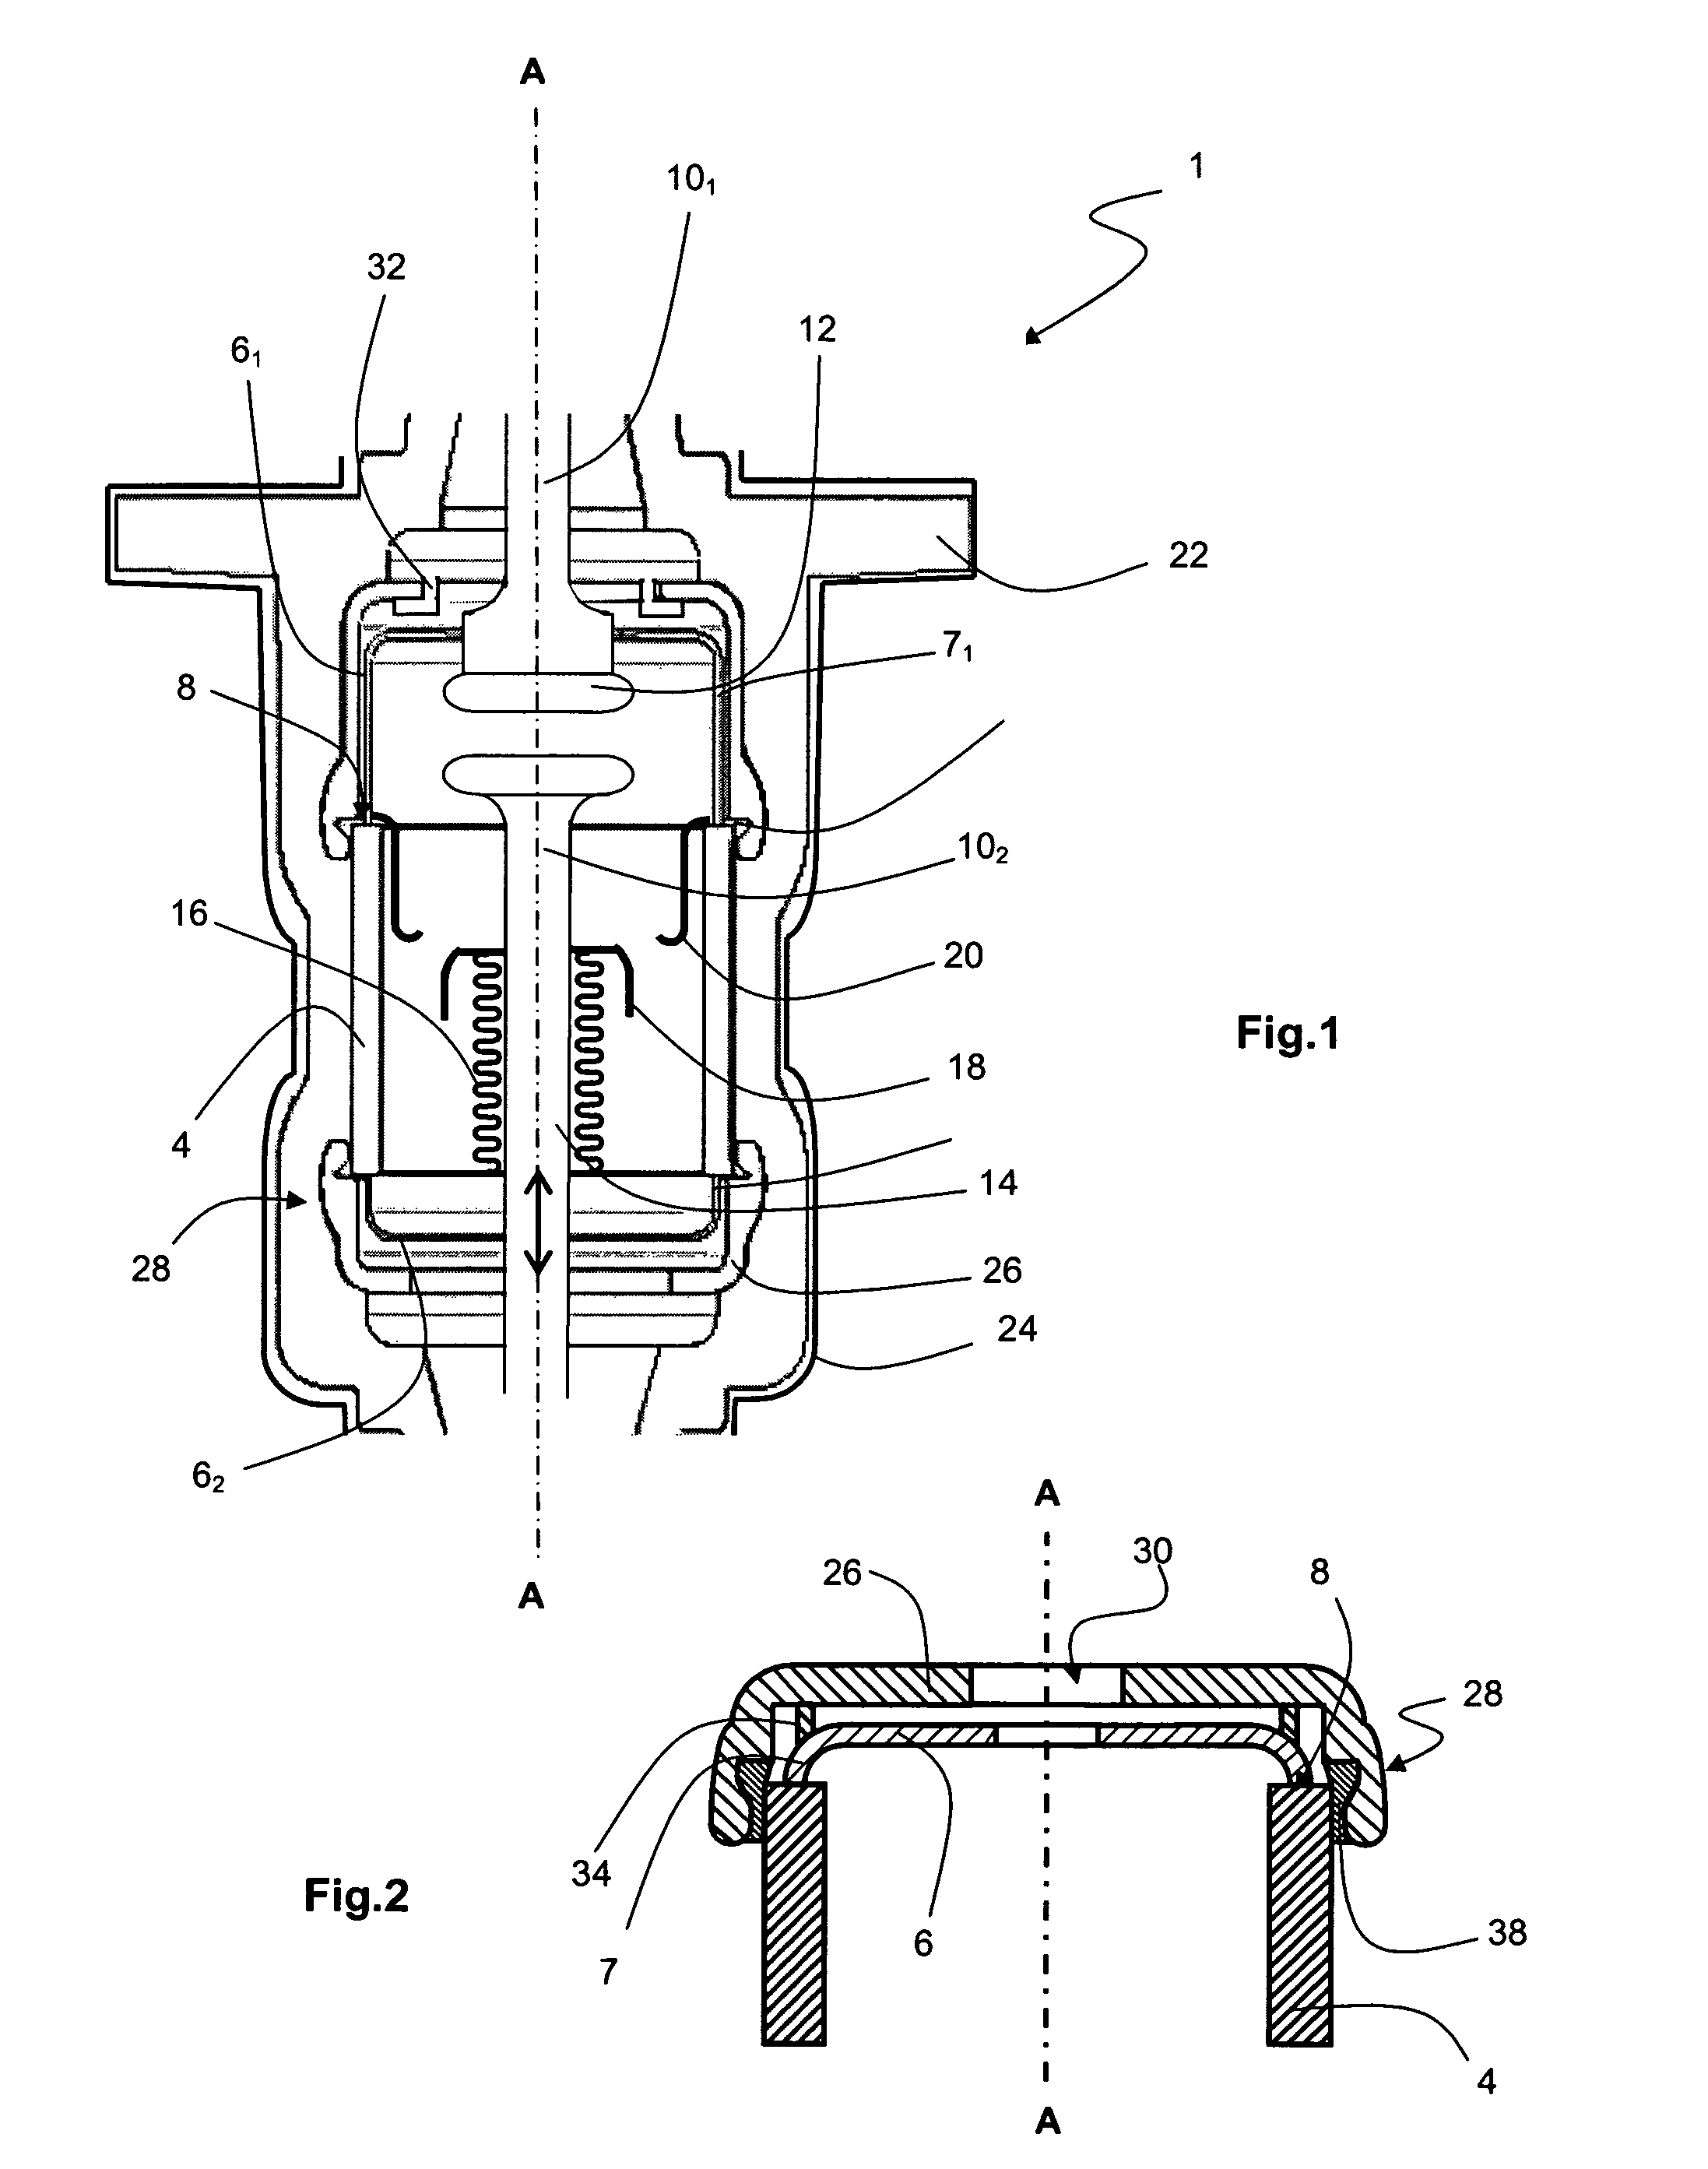 Insulation of a switchgear device of vacuum cartridge type by insert moulding